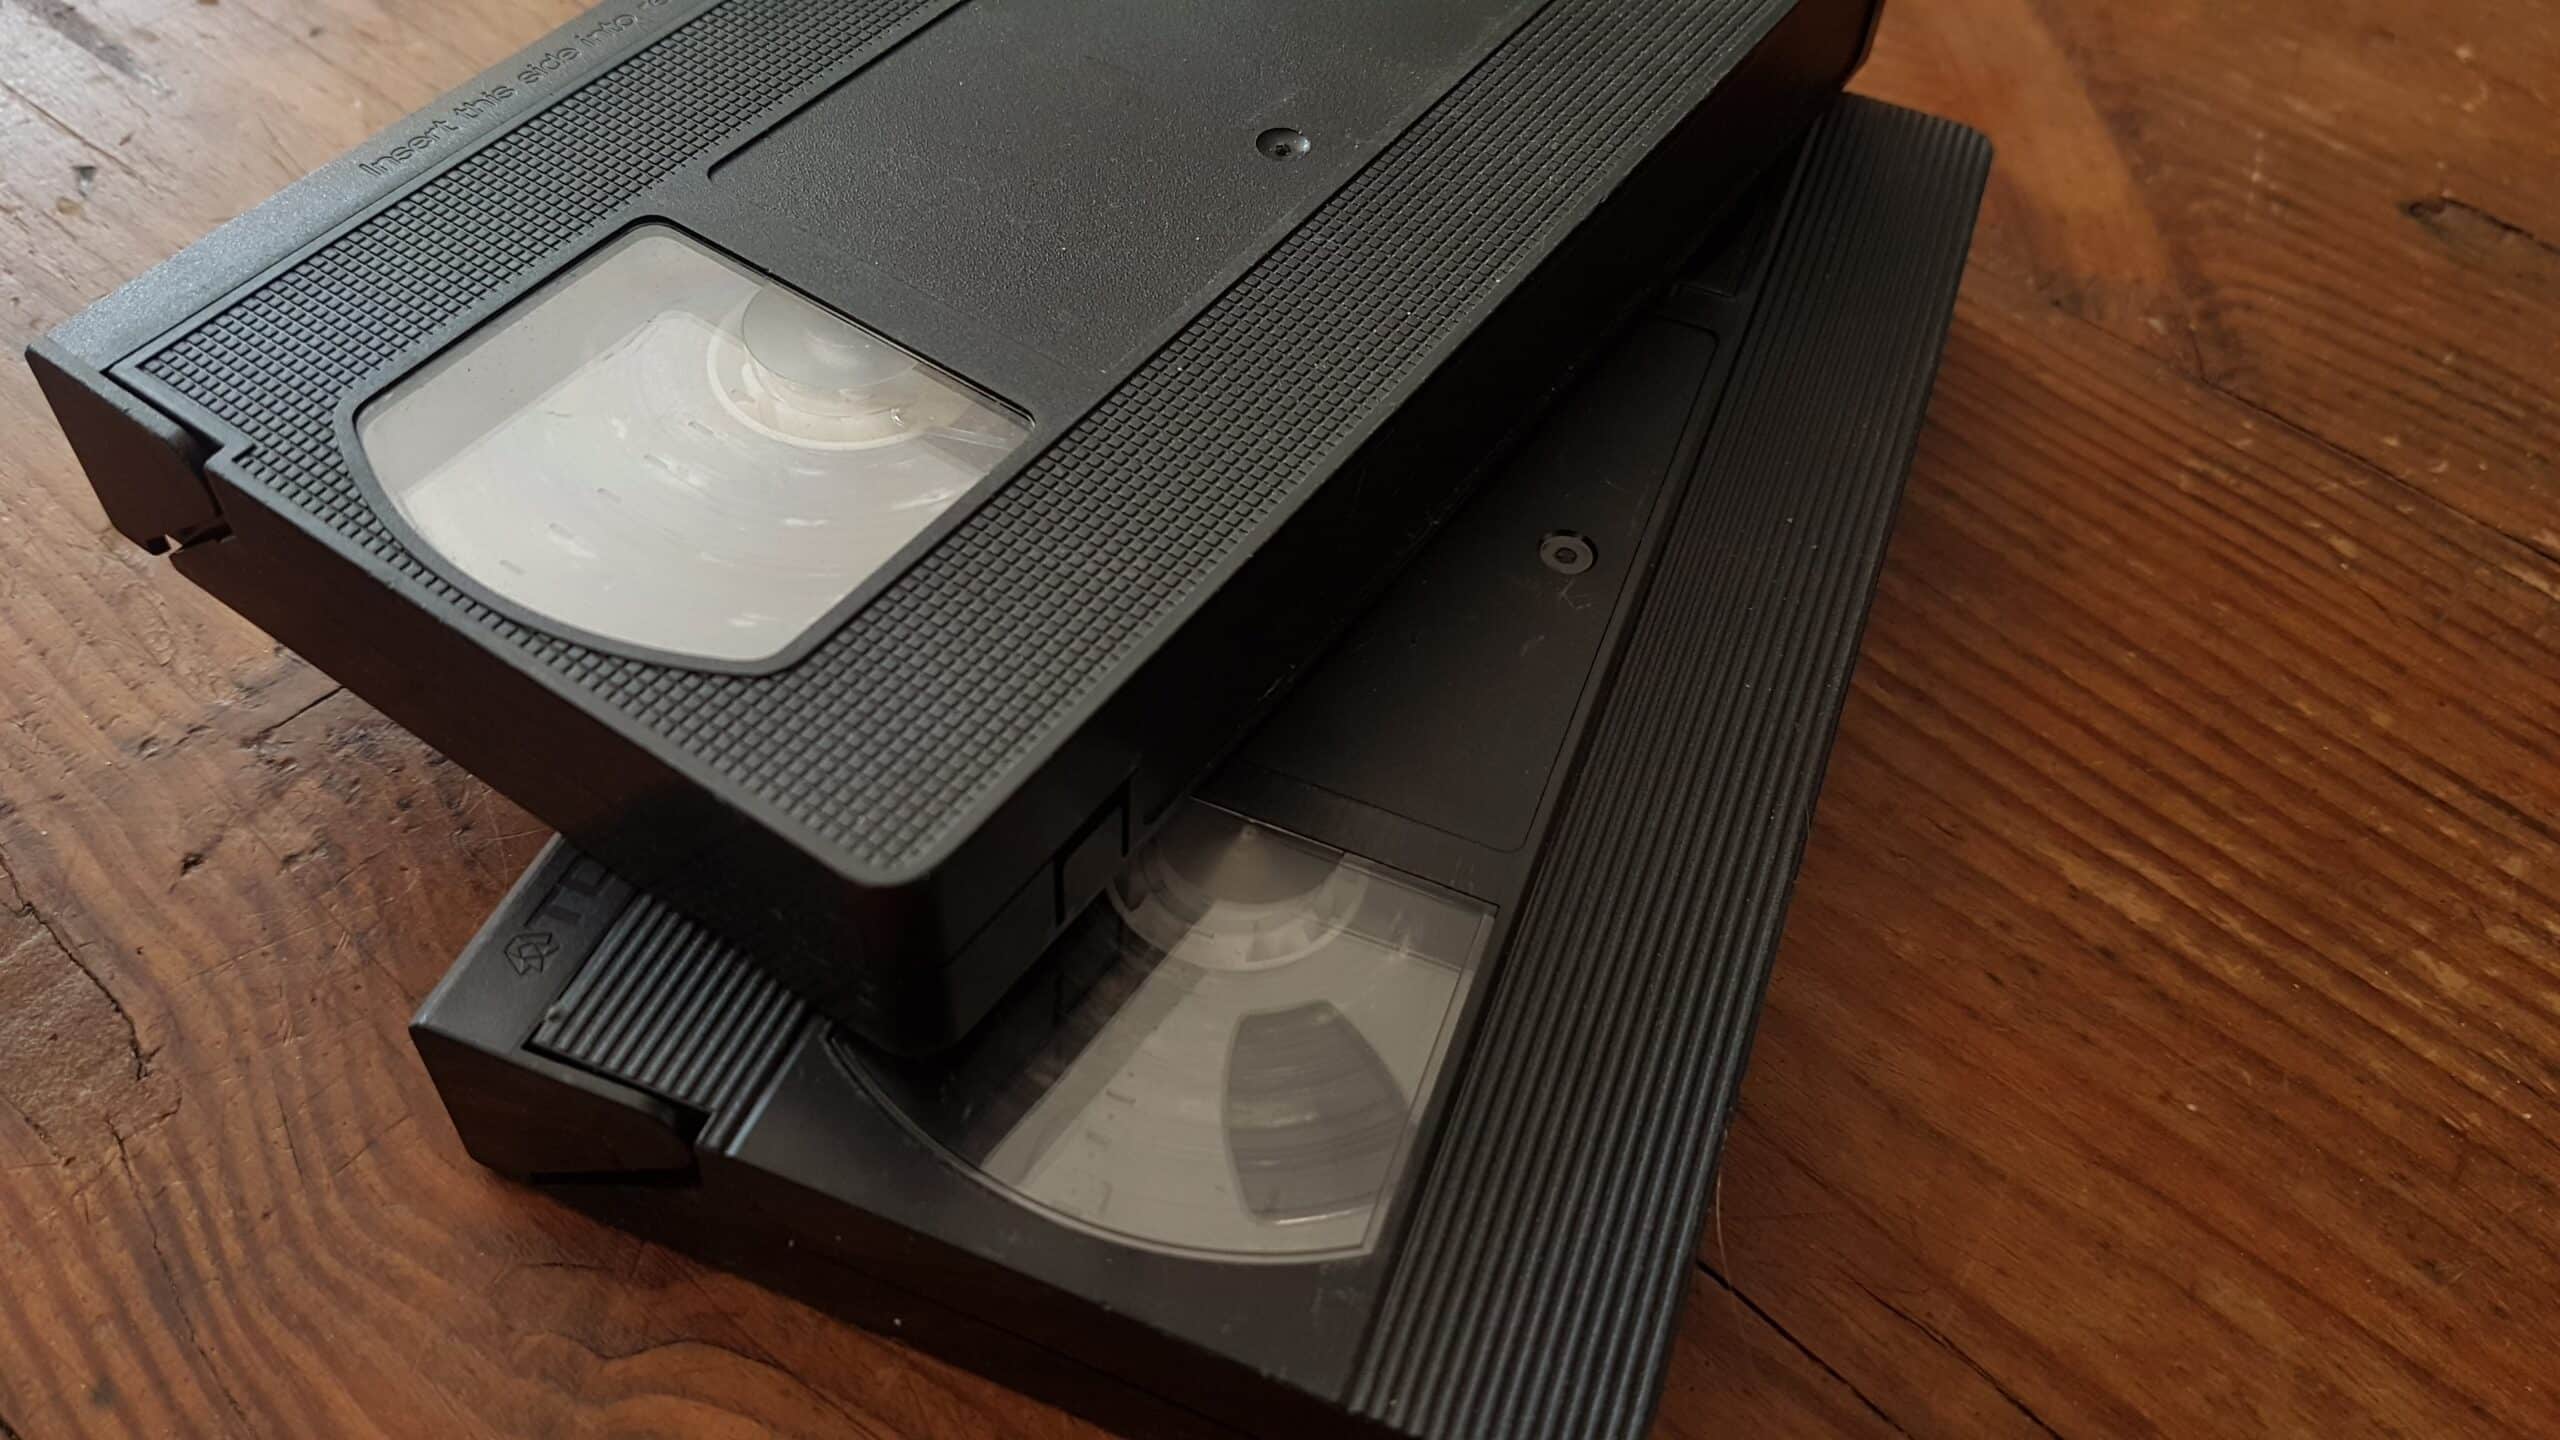 is my tape blank? - two vhs tapes on a table